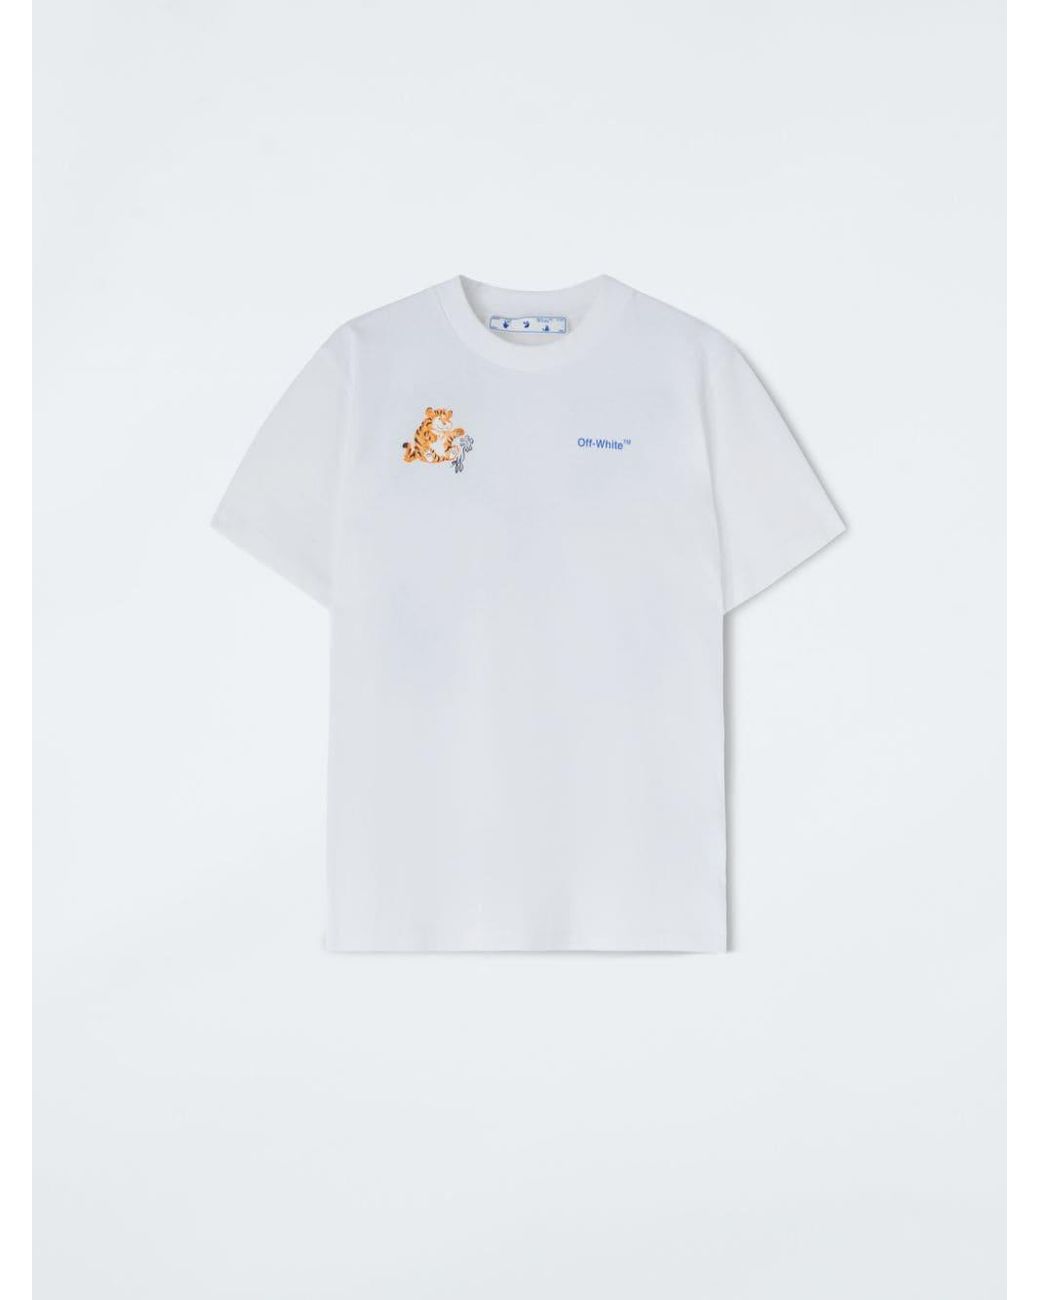 Off-White c/o Virgil Abloh Cotton Lny Arrow Tiger S/s T-shirt in White 